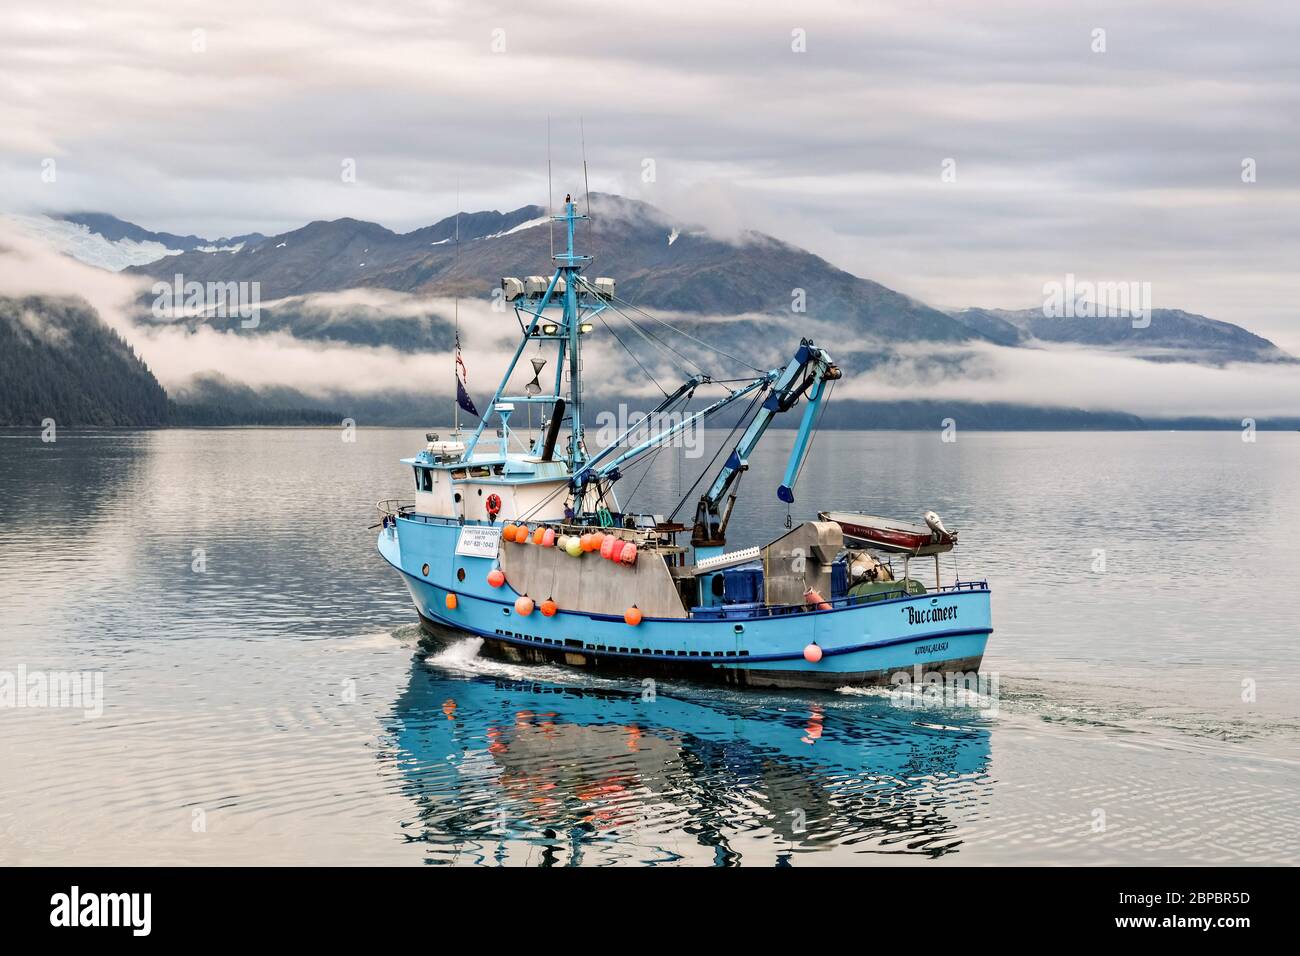 A commercial fishing boats heads out on the Passage Canal in